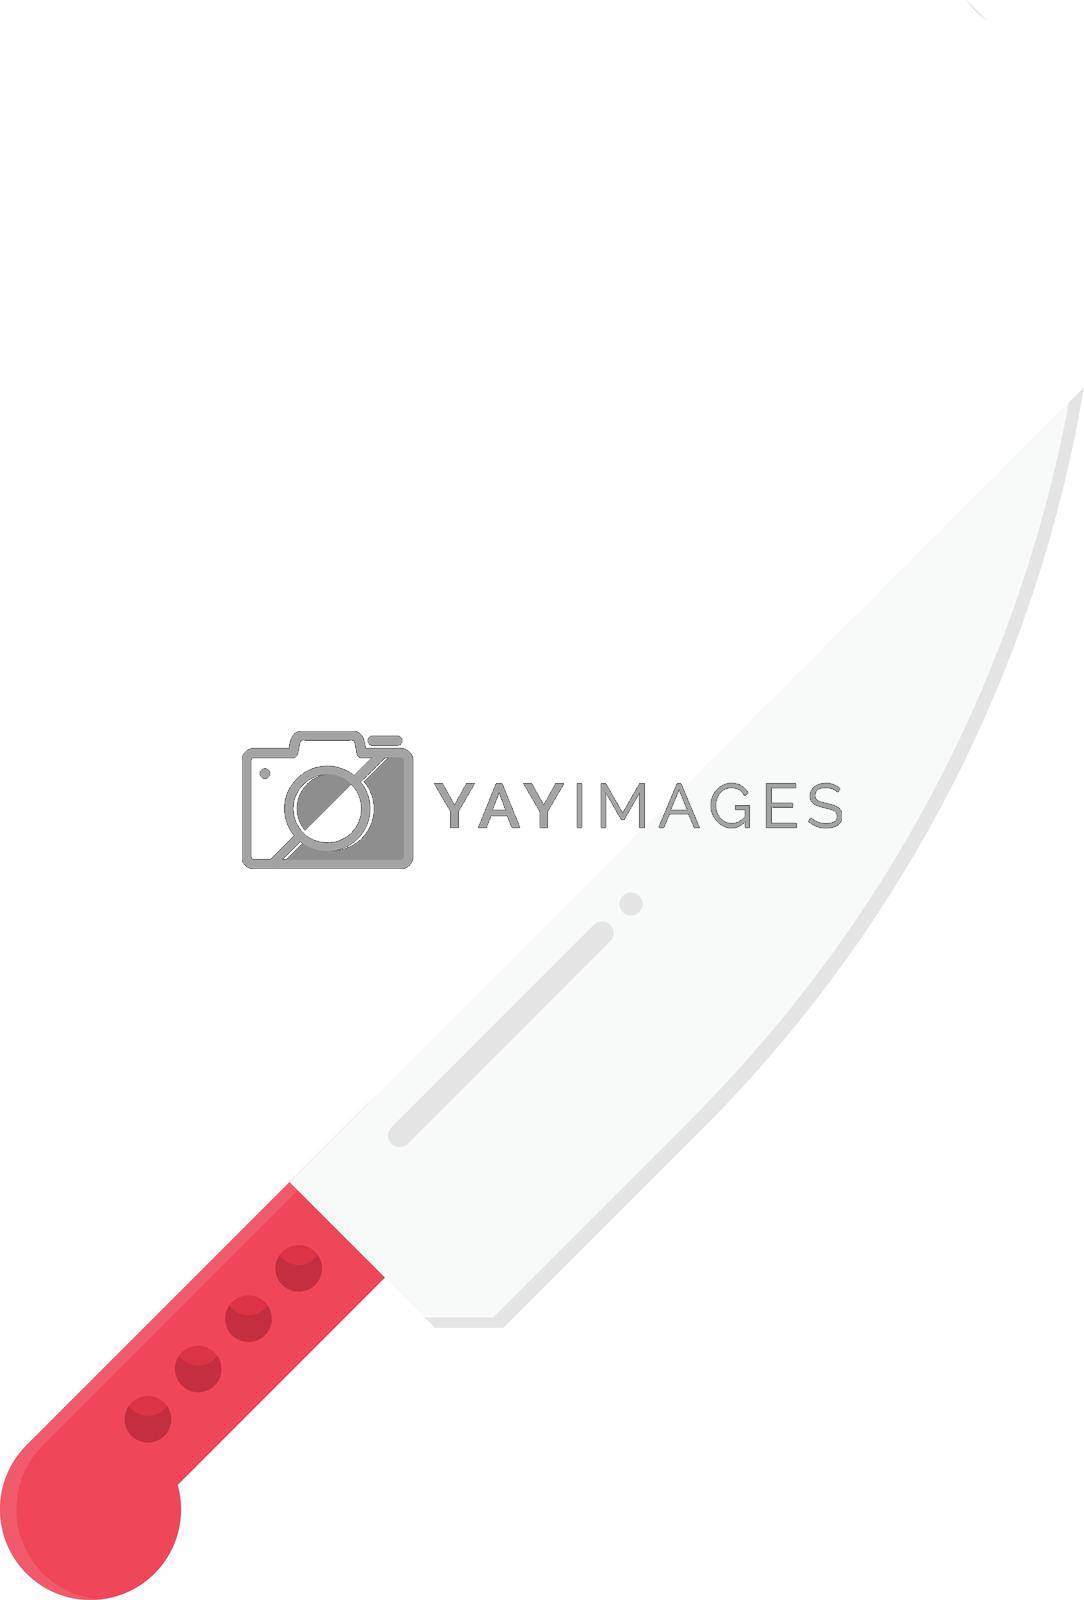 Royalty free image of knife by vectorstall